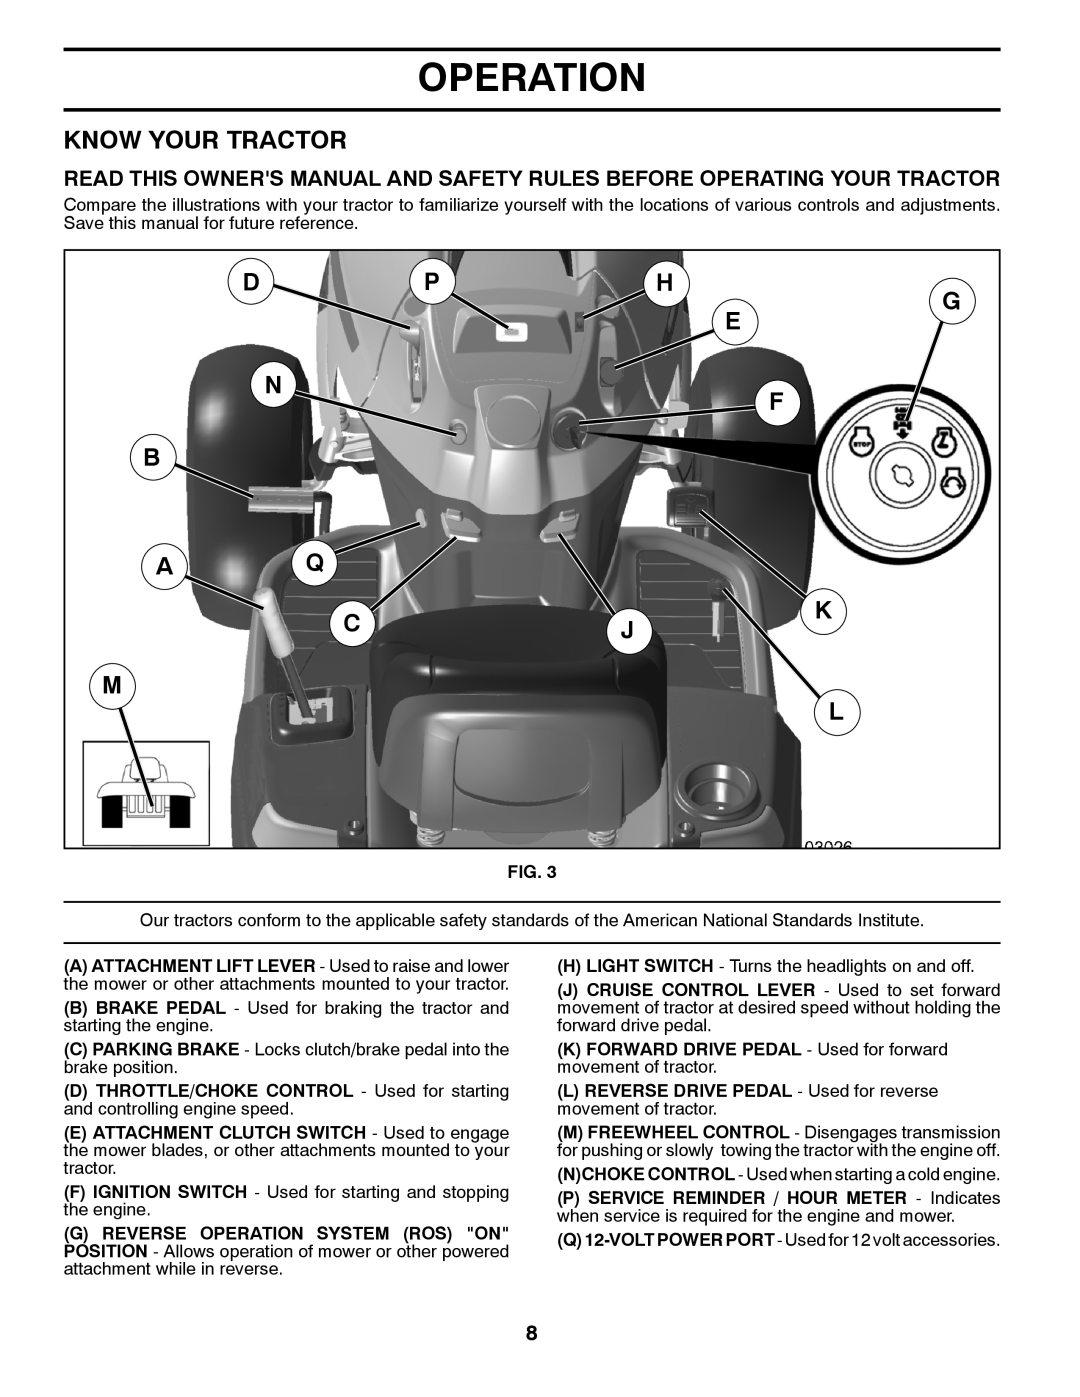 Husqvarna 2246LS owner manual Know Your Tractor, Operation 